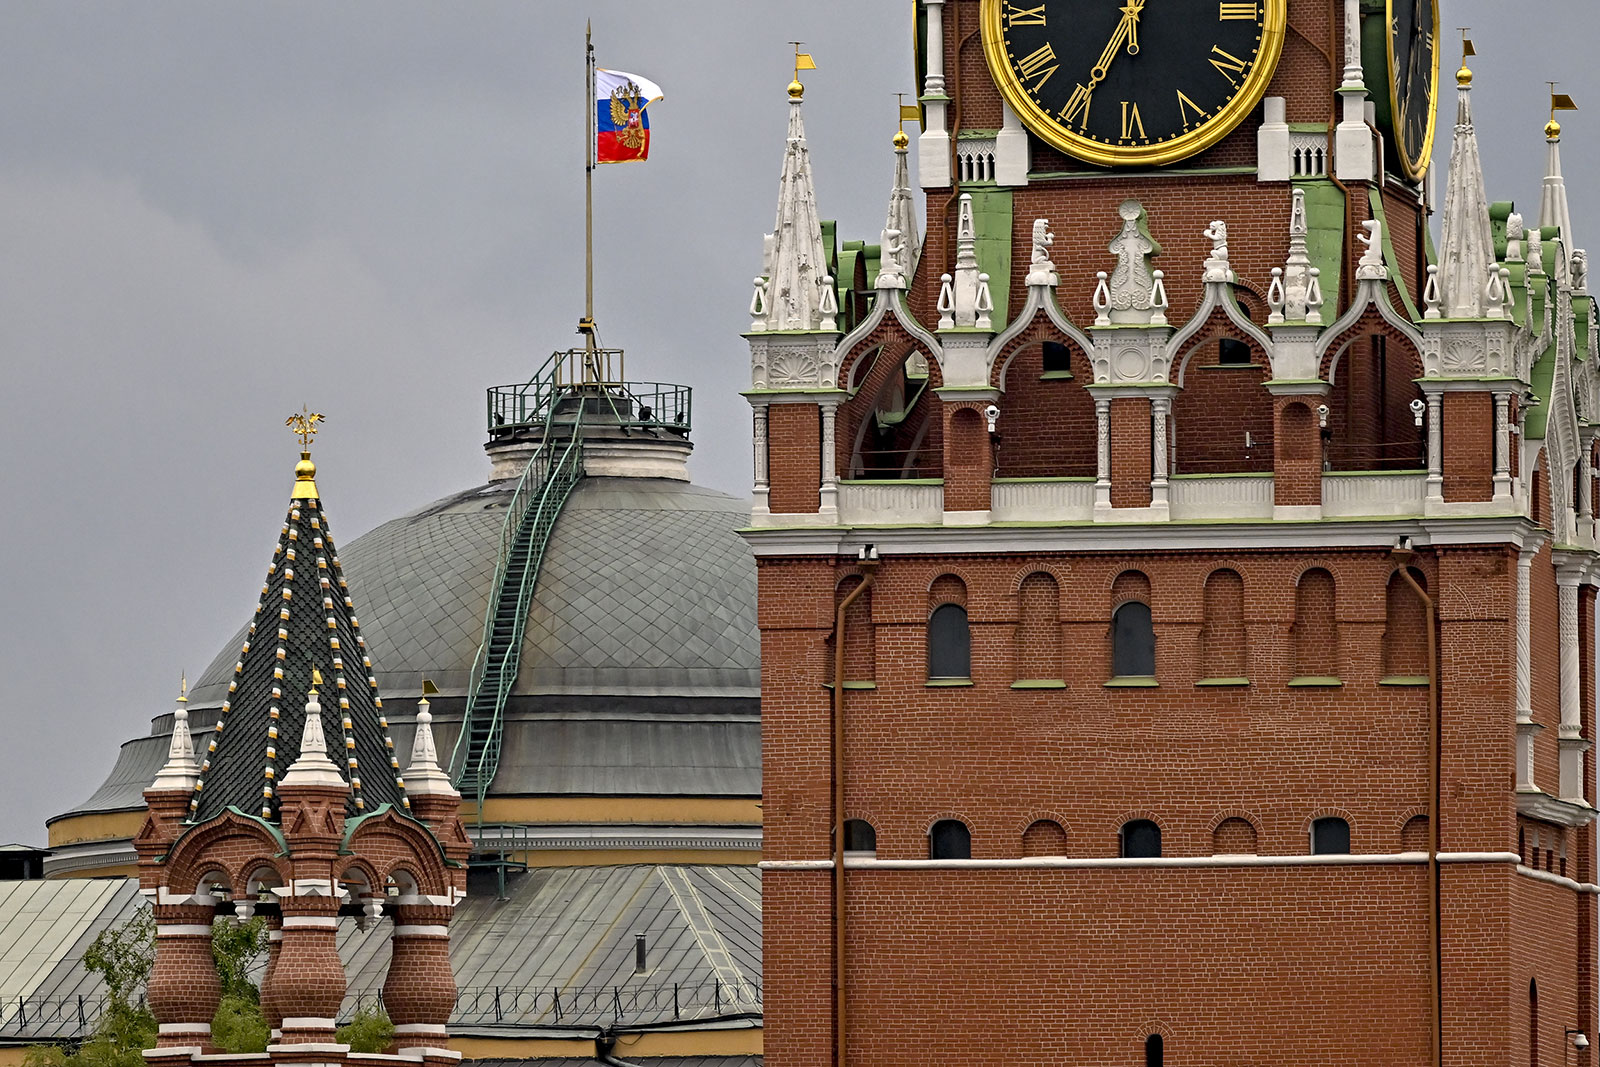 A wider view of Kremlin where what appears to be damage can be seen on the dome. 